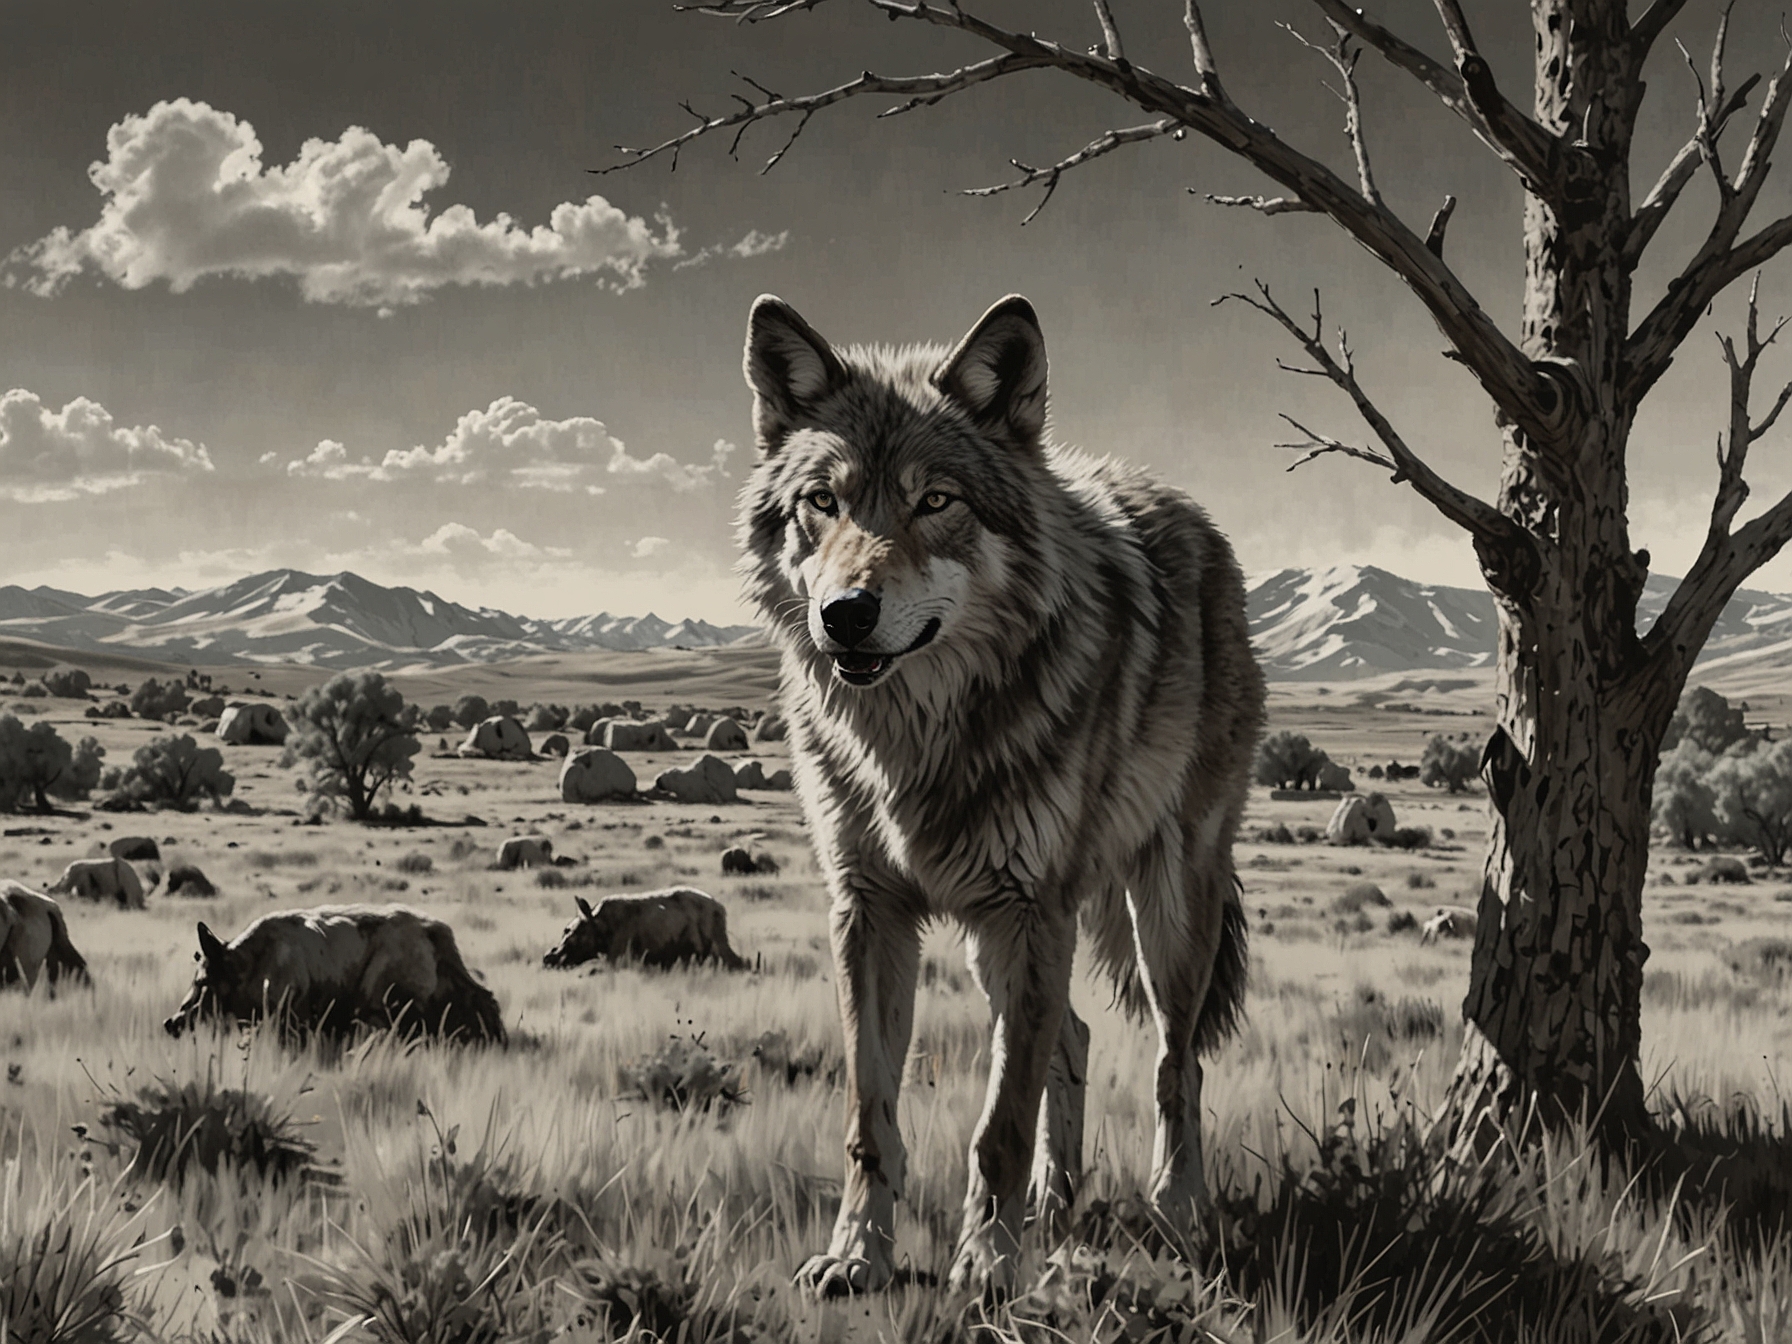 A wolf seen in a Colorado ranch landscape, symbolizing the growing concerns of cattle predation among local ranchers and the ensuing debates for wildlife management strategies.